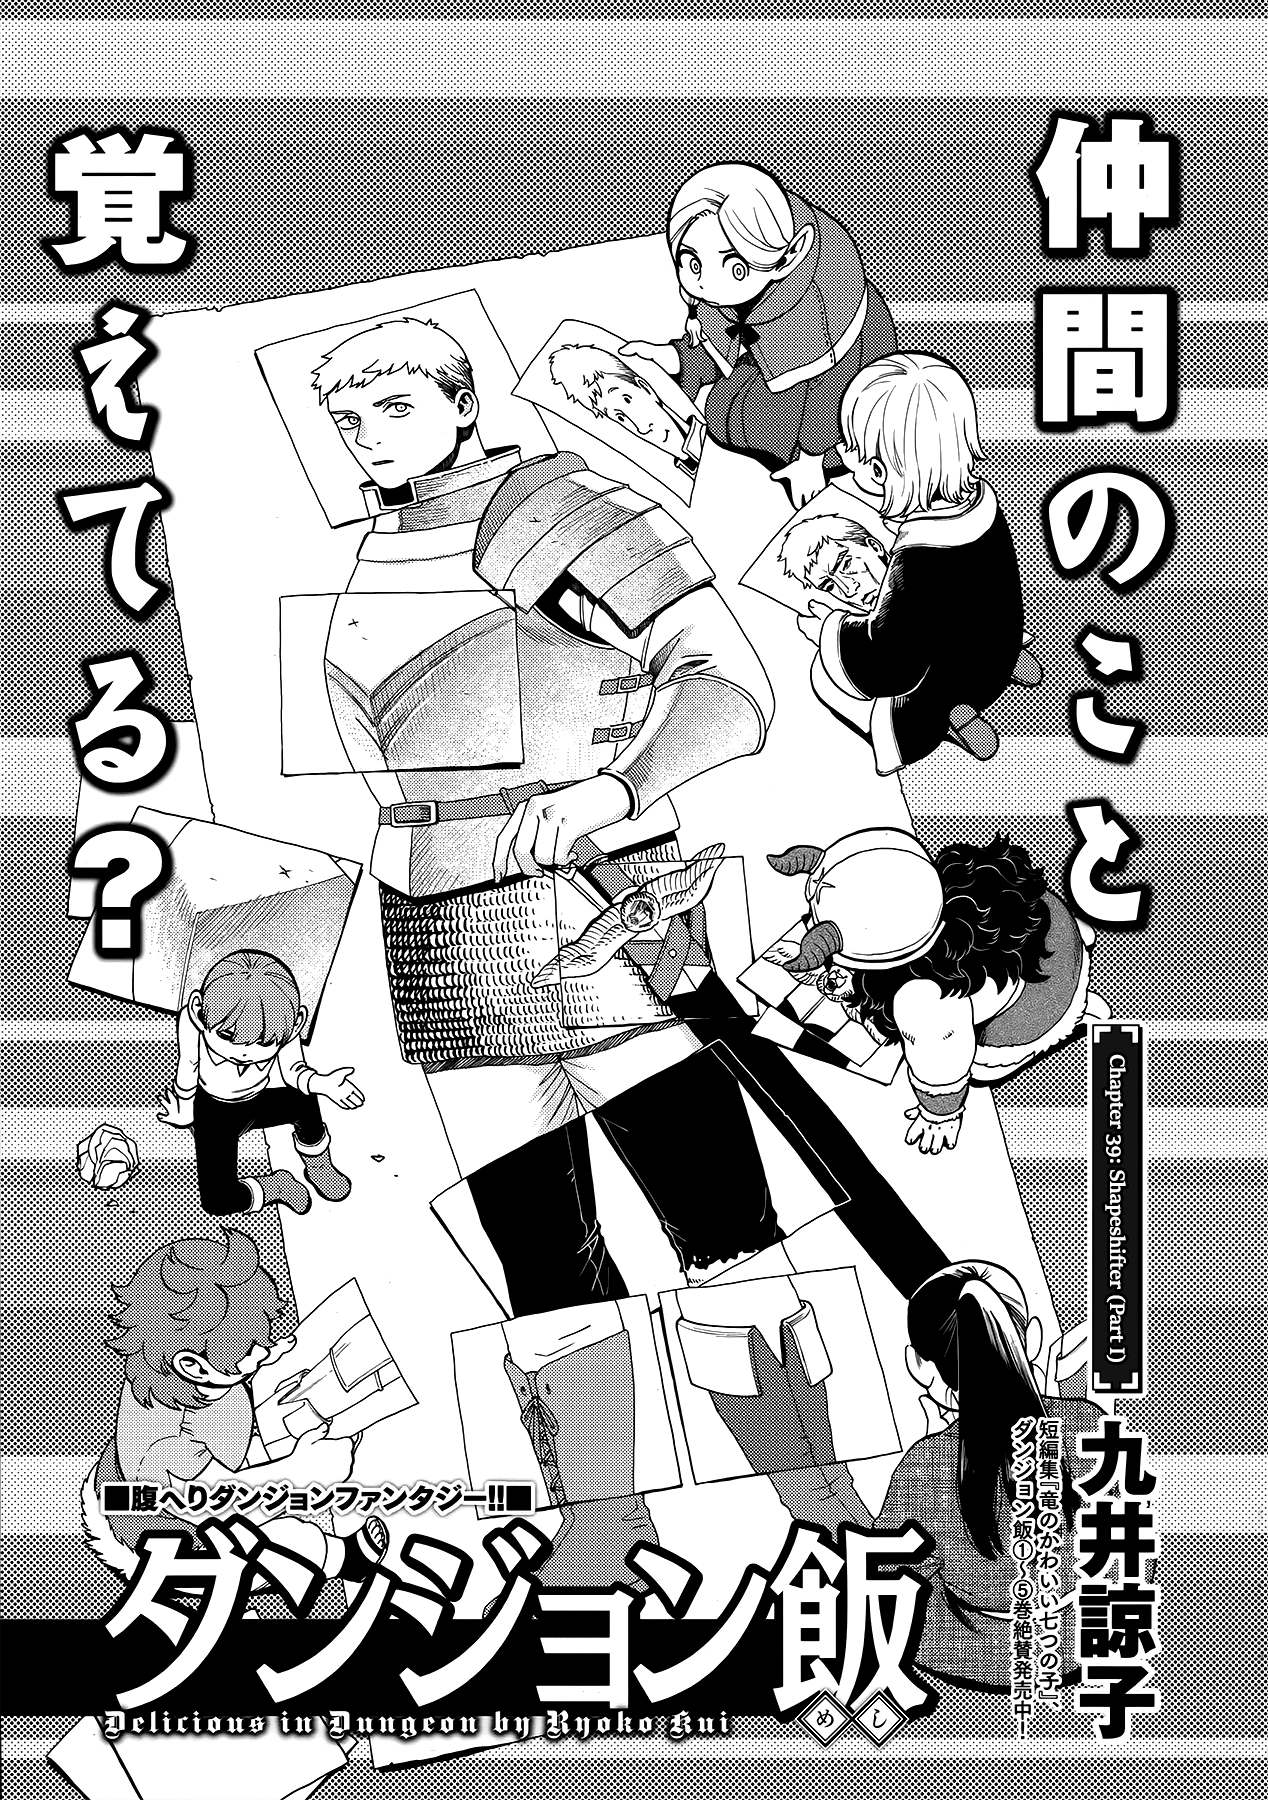 Dungeon Meshi Vol.6-Chapter.39-Shapeshifter-(Part-I) Image